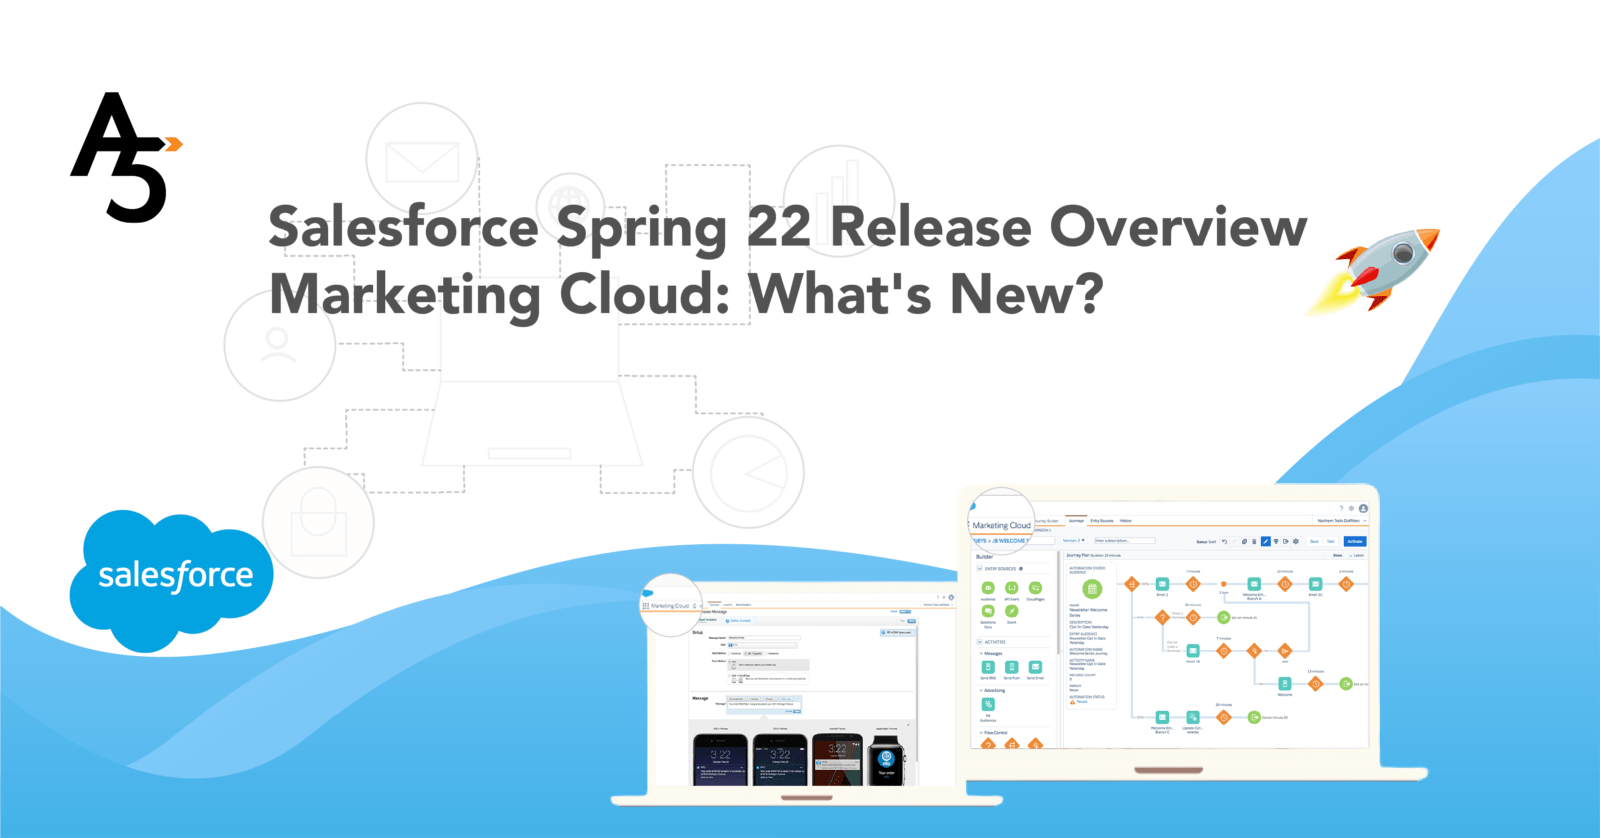 Salesforce Spring 22 Release Overview Marketing Cloud